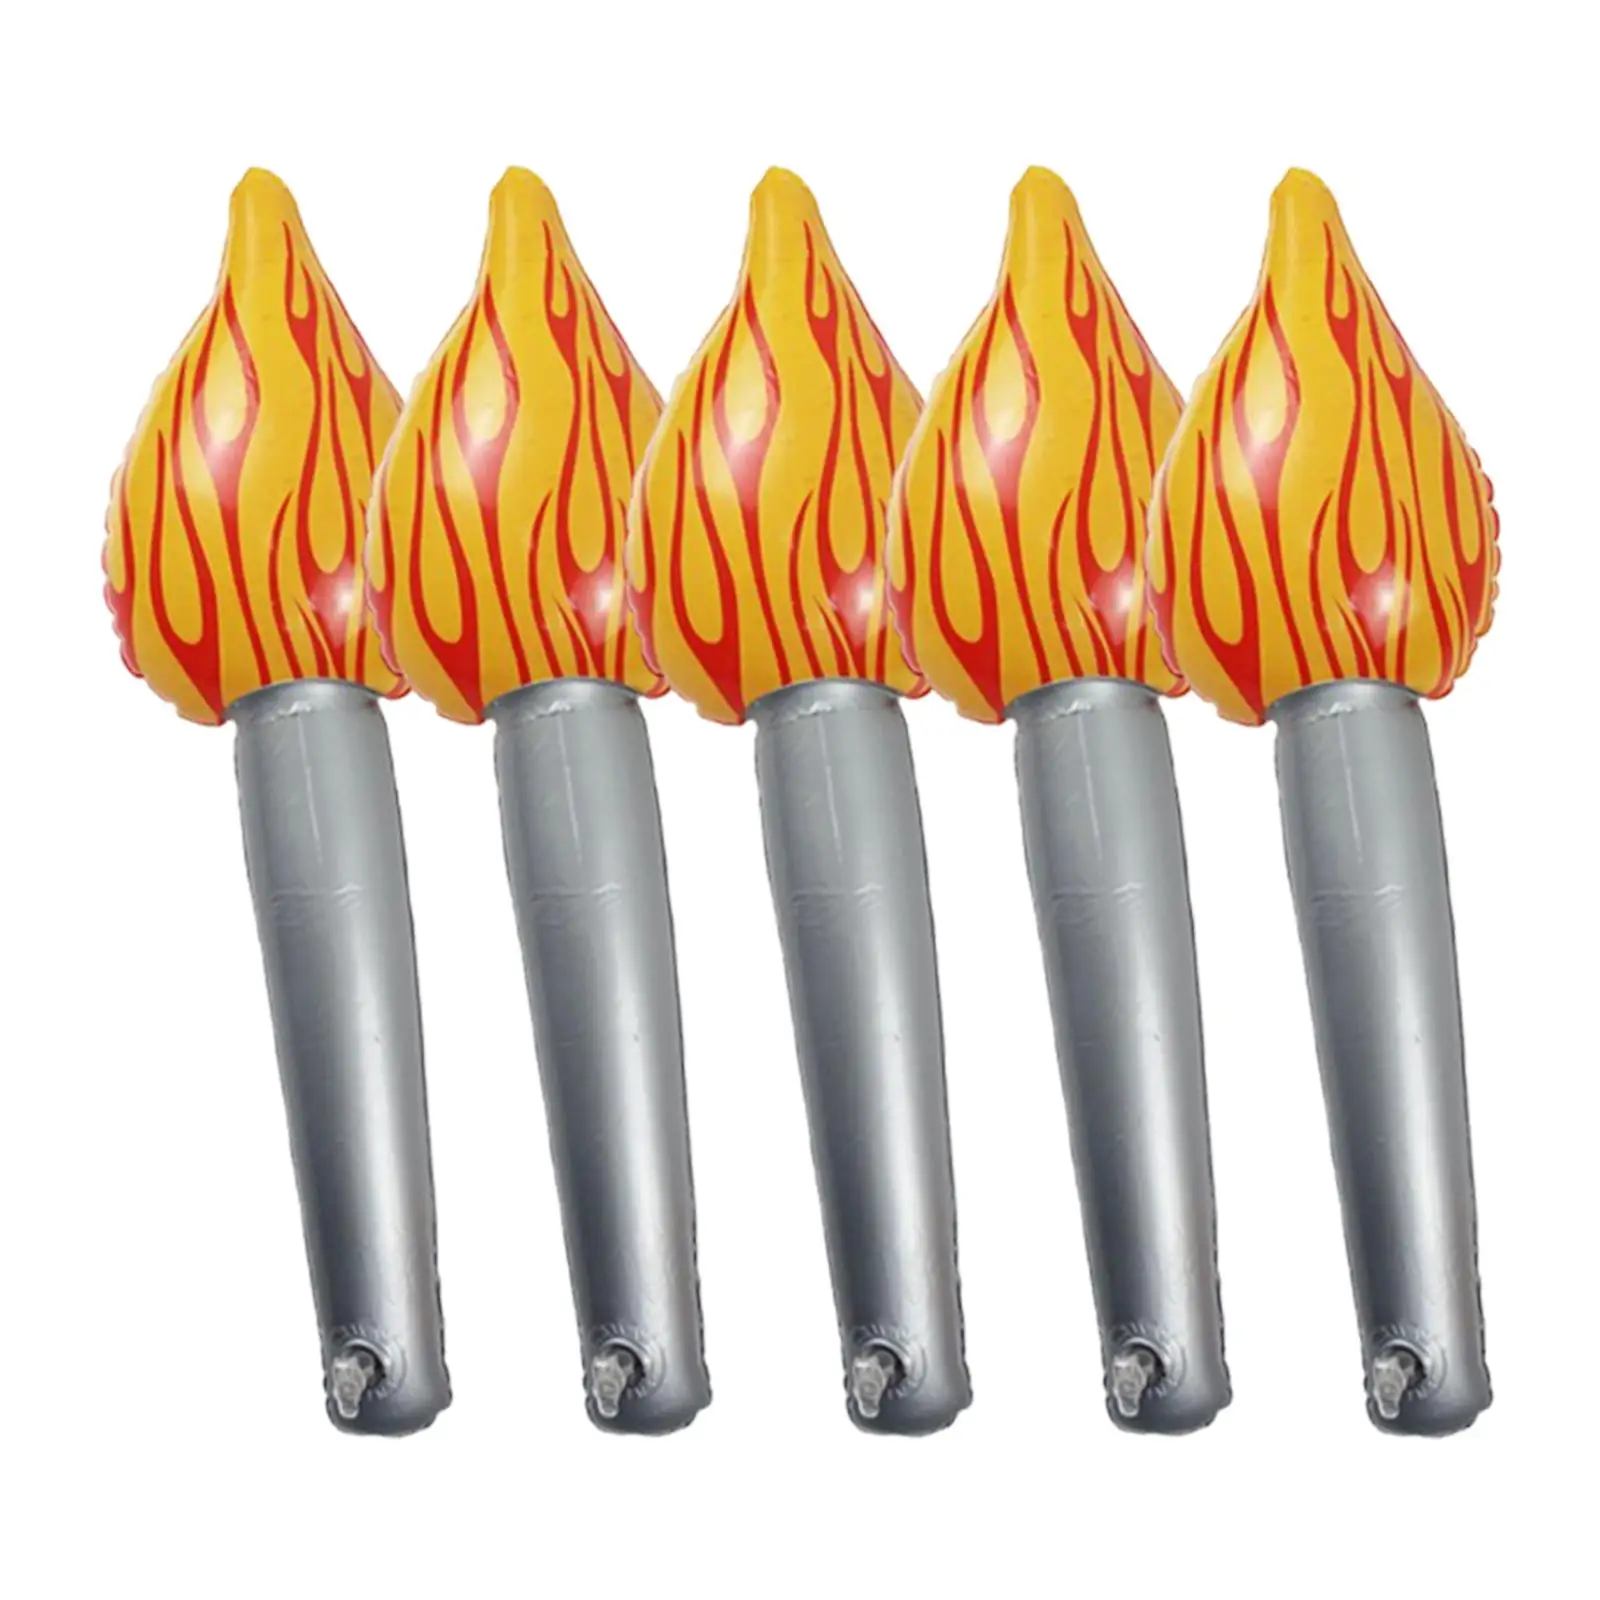 5Pcs Inflatable Flame Toy 15inch PVC Balloons for Party Birthday Activities